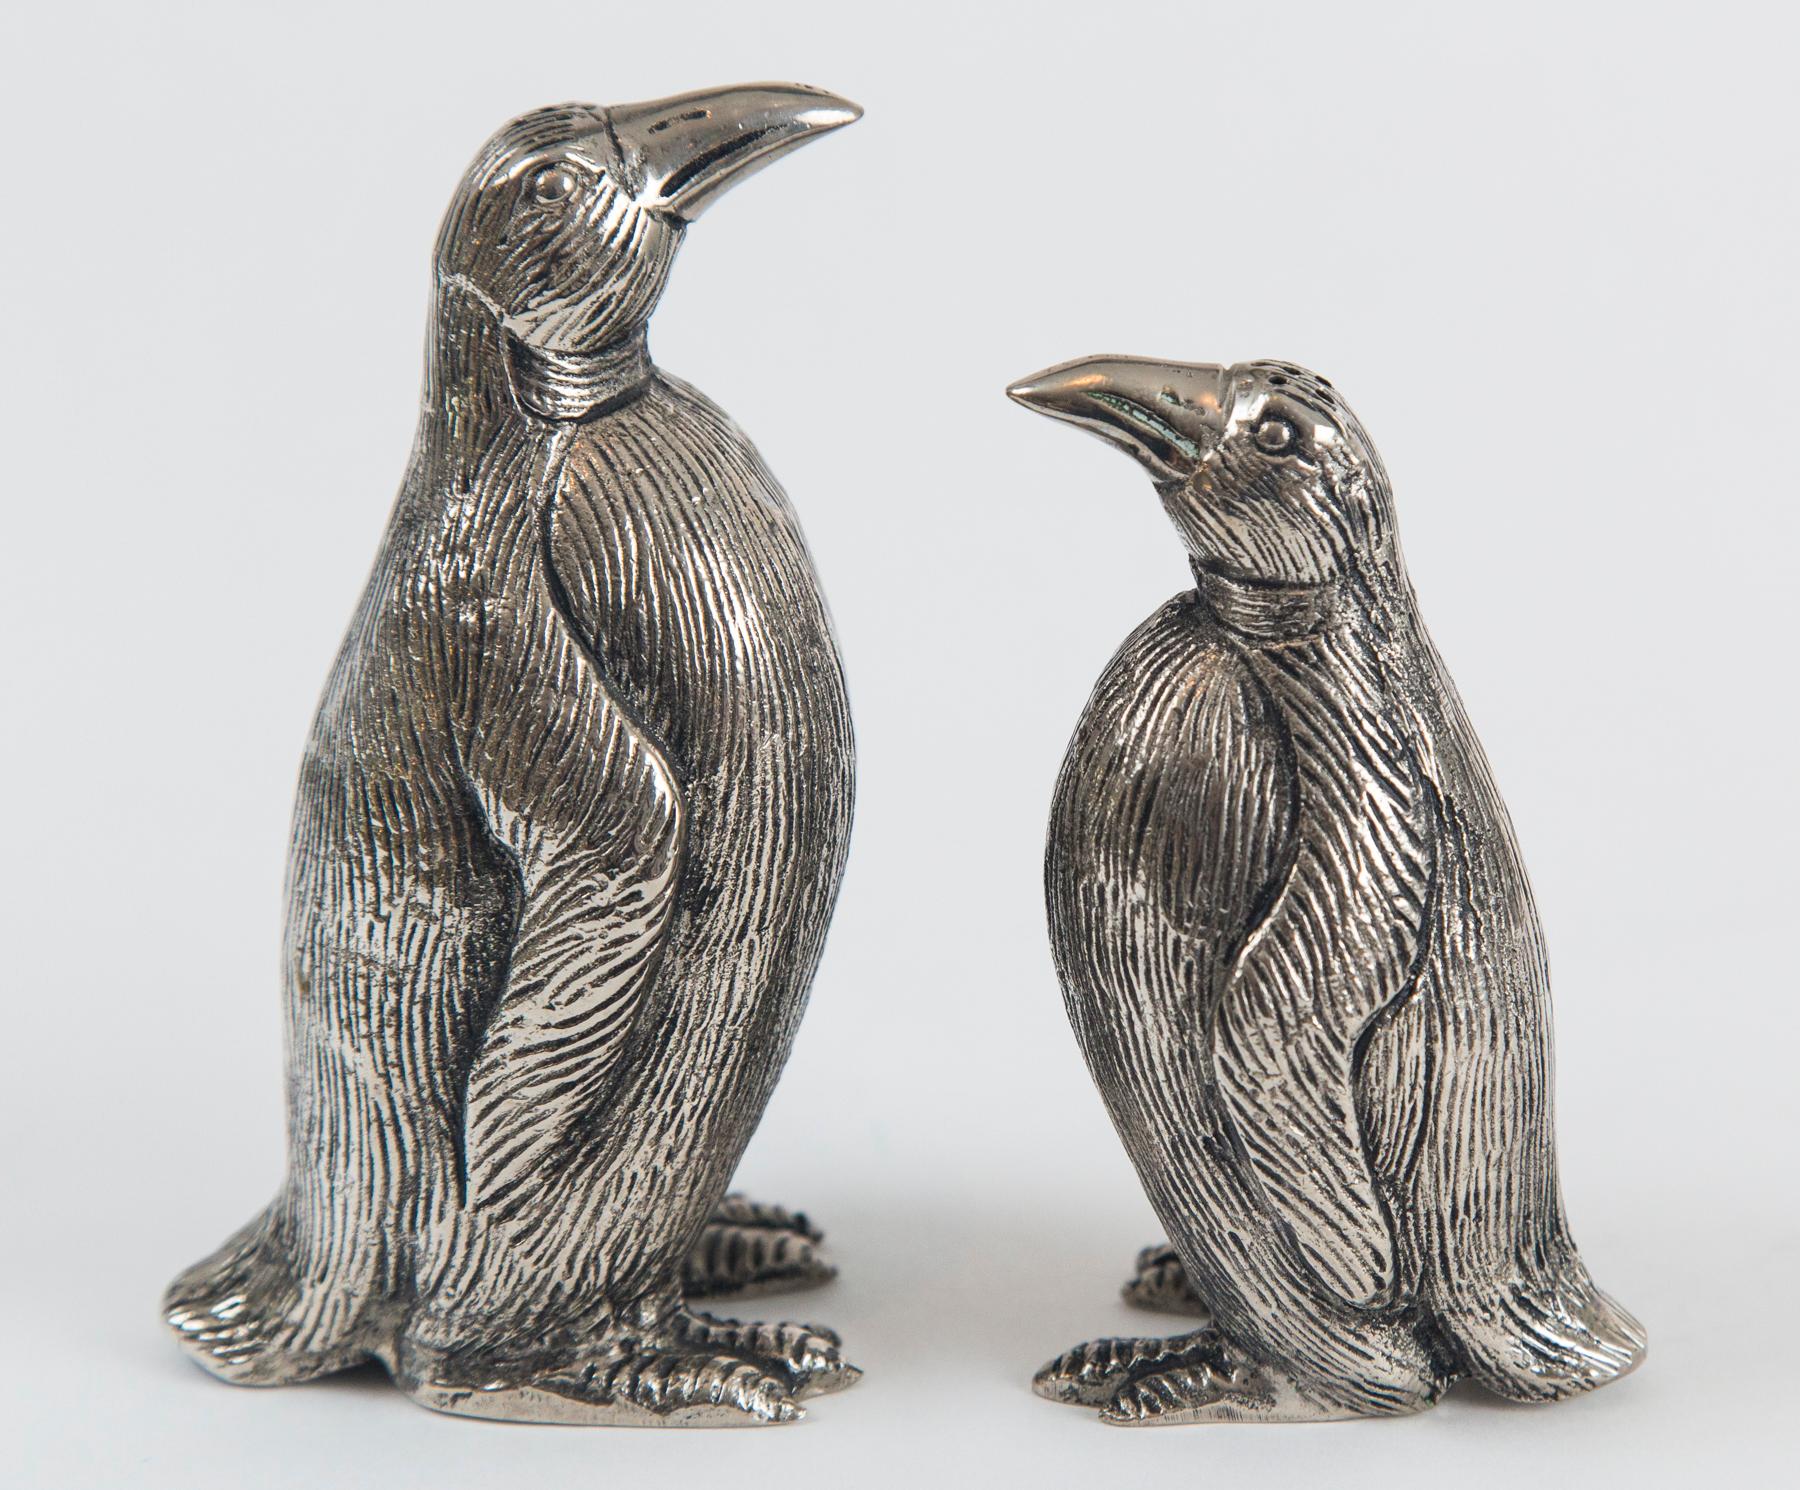 Late 20th Century Gucci Penguin Salt and Pepper Shakers, Silver Plate Over Pewter